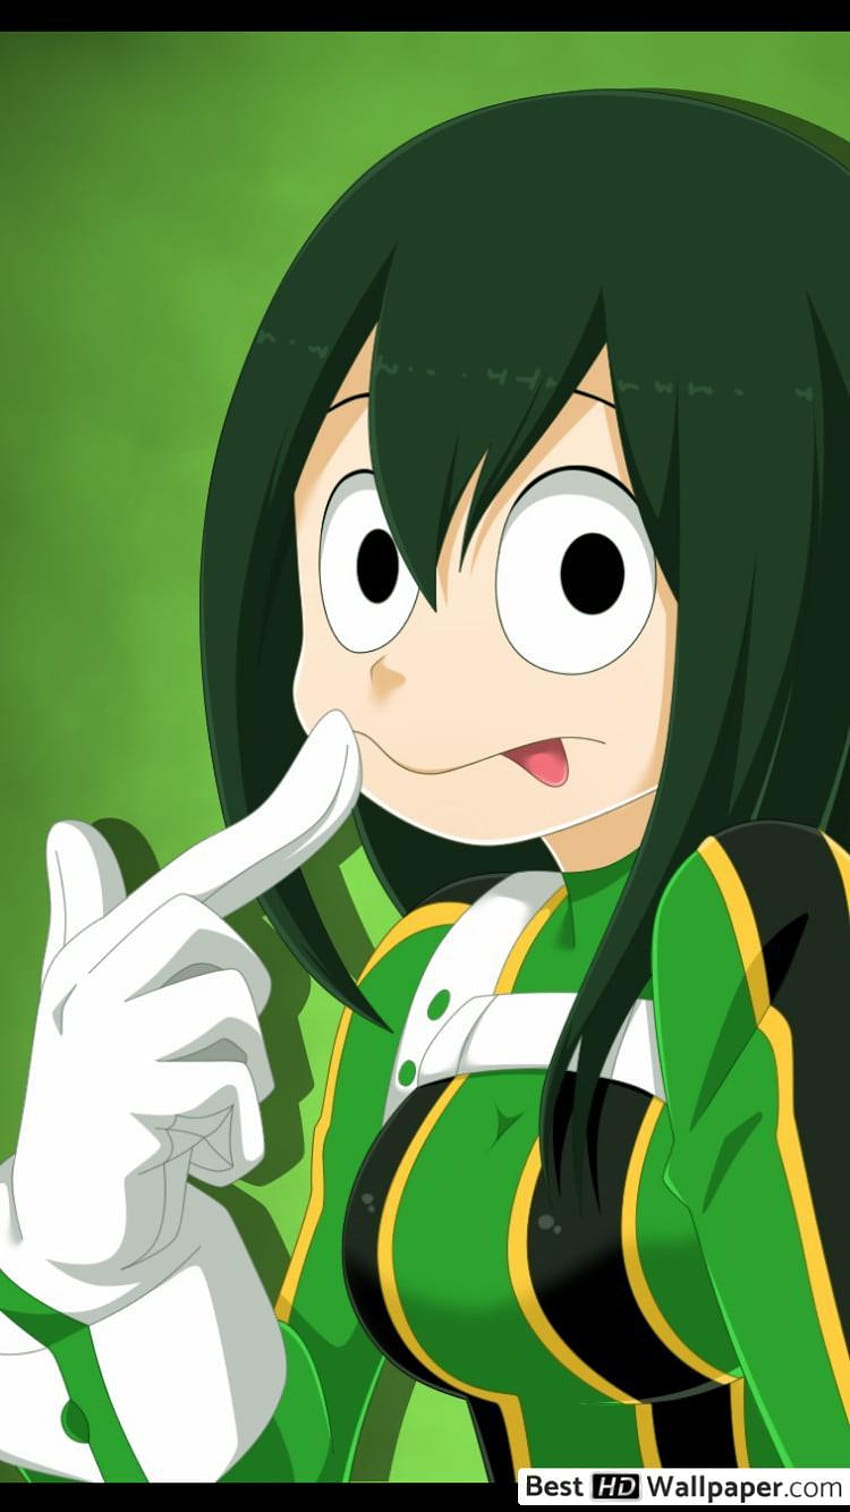 My Hero Academia: Asui Tsuyu/FROPPY Dark Green Wig, Anime Female Character  Cosplay 80cm Bow Long Hair, Womens Fashion Wigs Used For Comic Con And  Halloween Party : Amazon.ae: Beauty